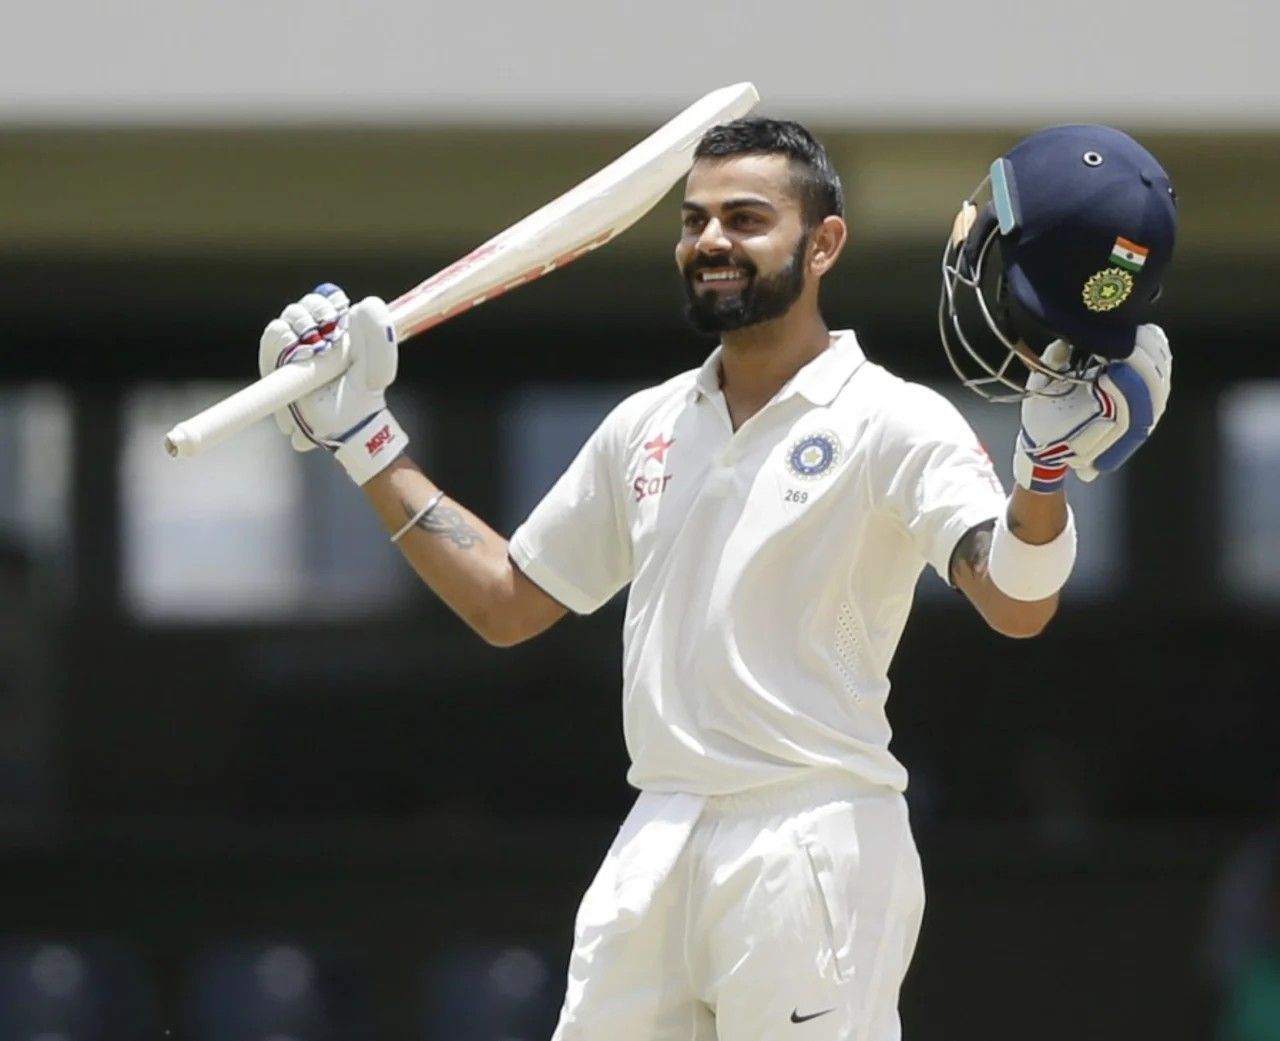 Virat Kohli scored his first double-century vs West Indies [Getty Images]